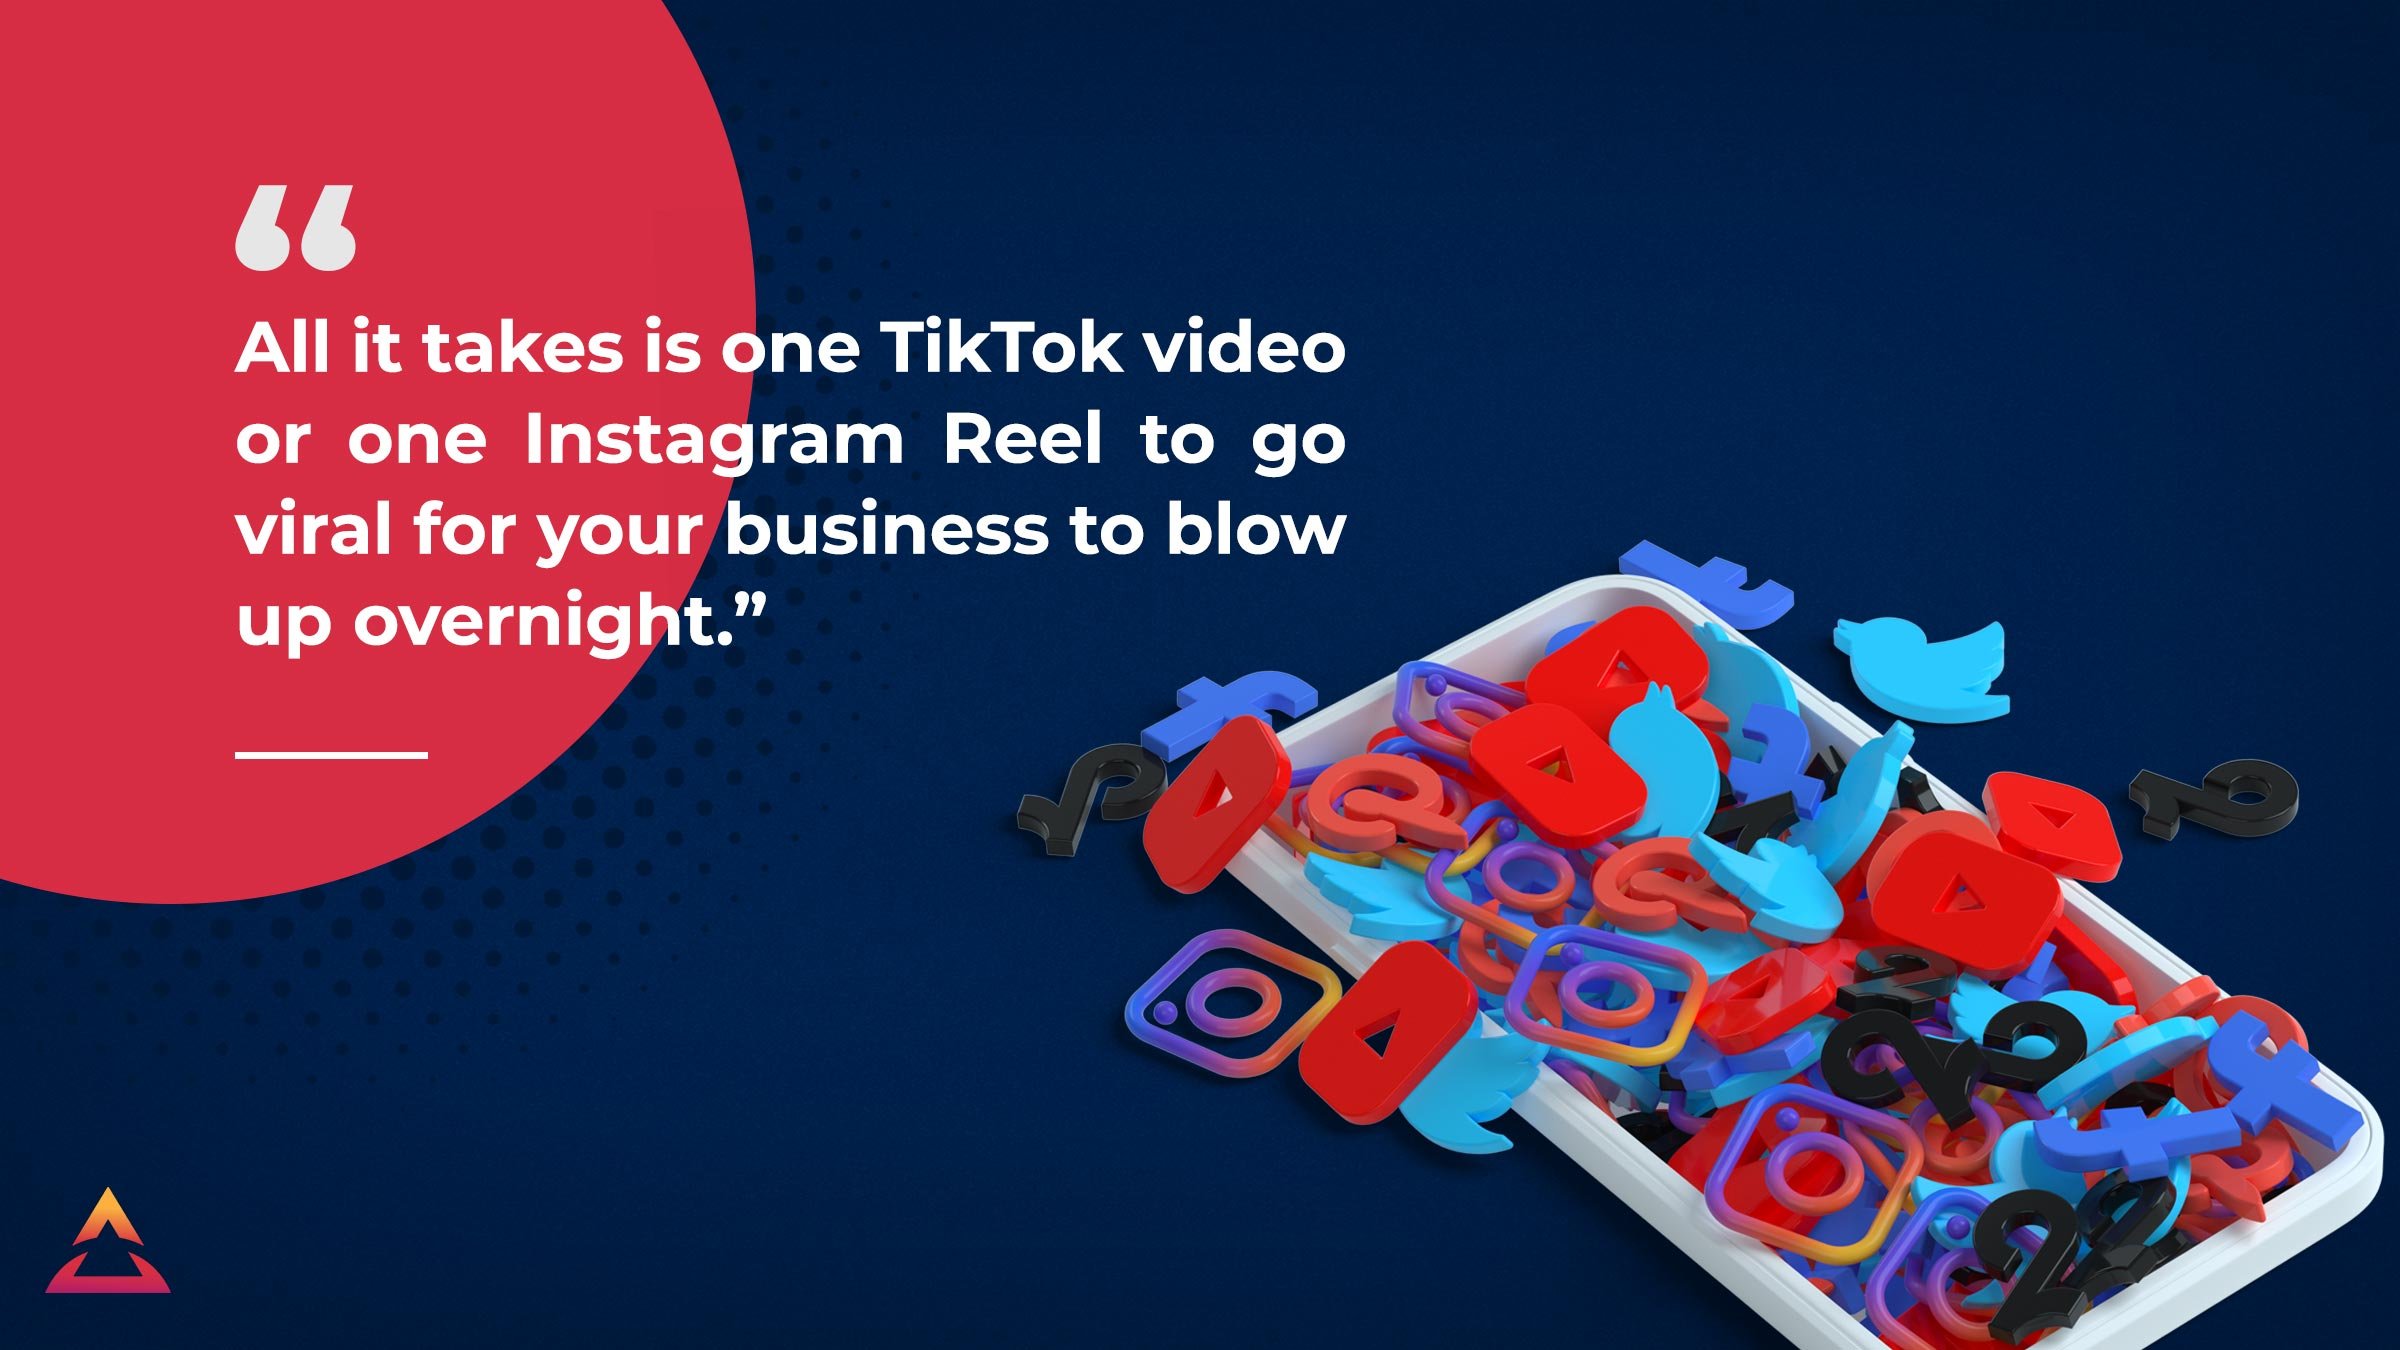 All it takes is one TikTok video or one Instagram Reel to go viral for your business to blow up overnight.